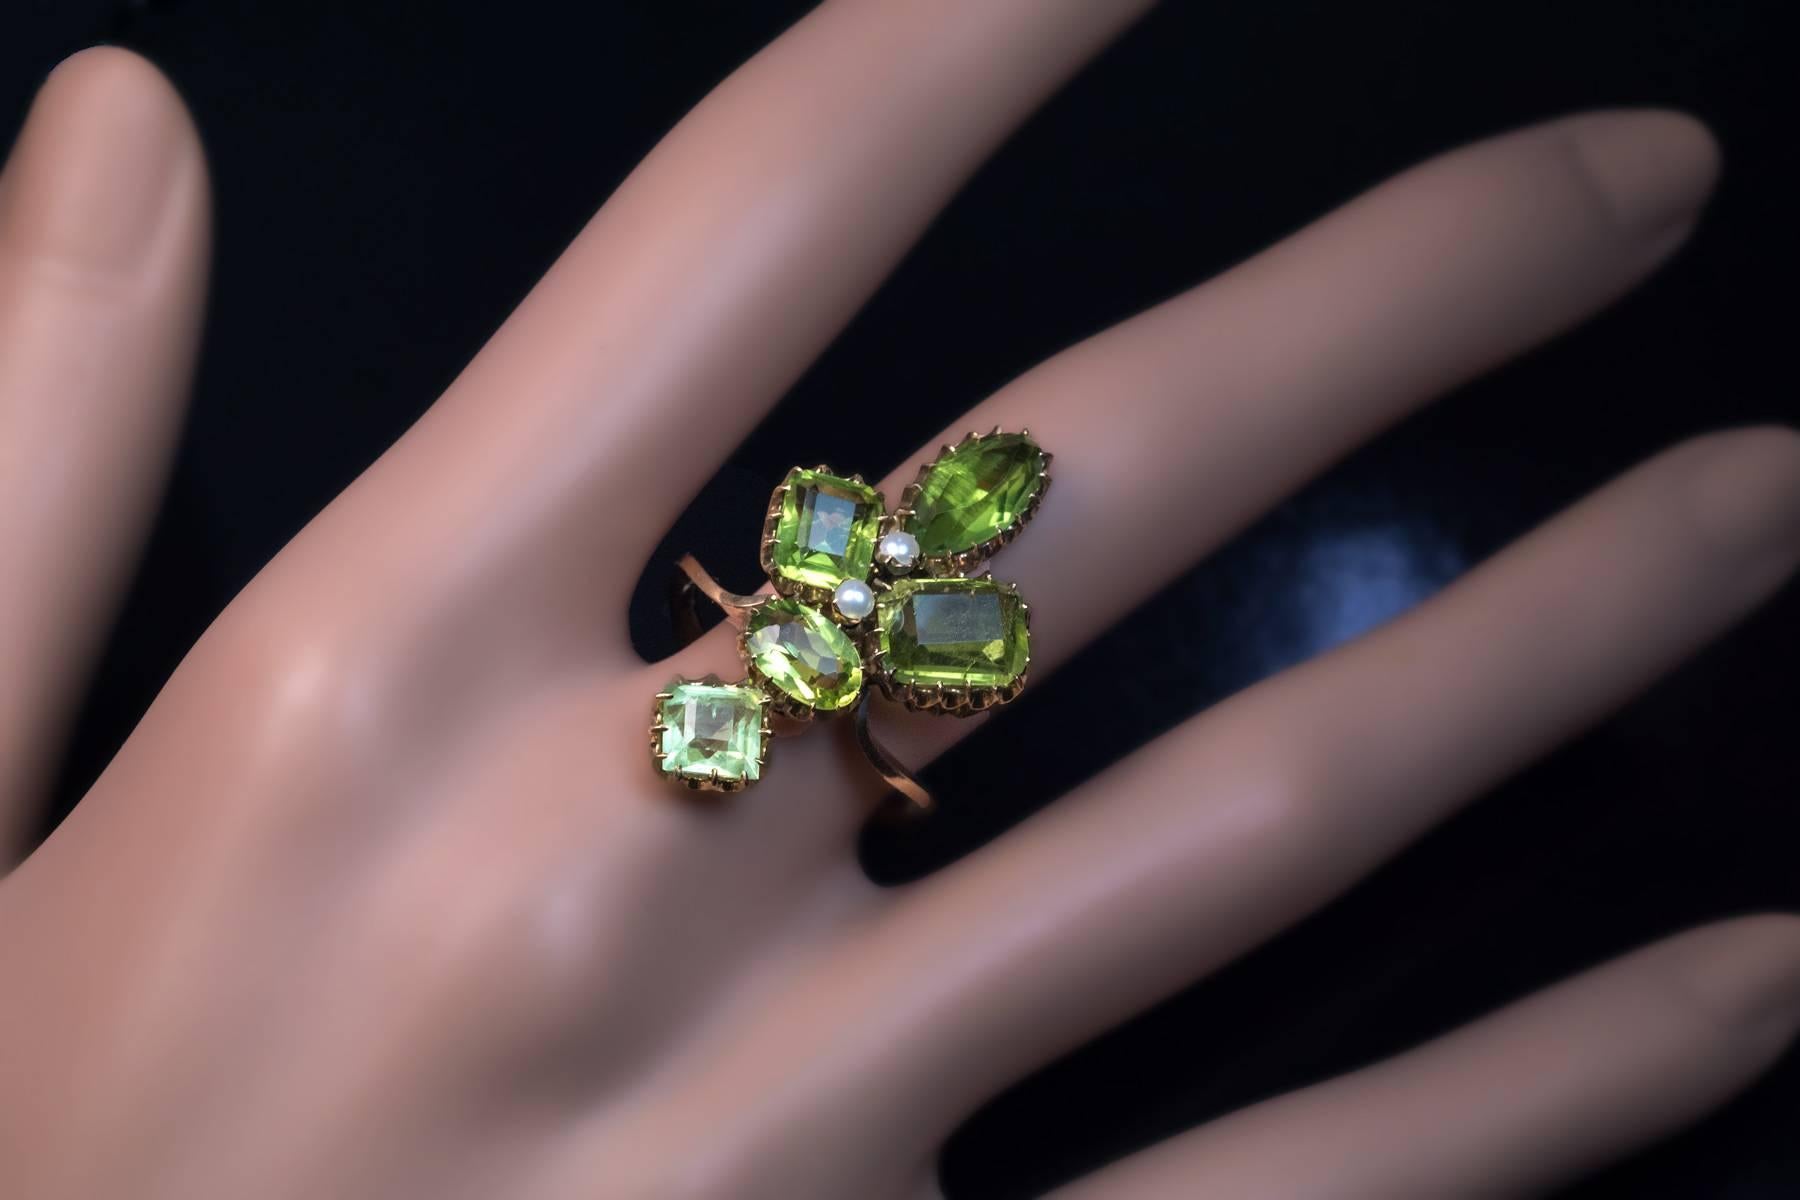 Circa 1900

An antique 14K gold ring designed as a large stylized Art Nouveau flower prong-set with five peridots of various shapes (approximately 1.45 ct, 1.43 ct, 1.09 ct, 0.94 ct,  0.75 ct and two small half pearls.

Estimated total peridot